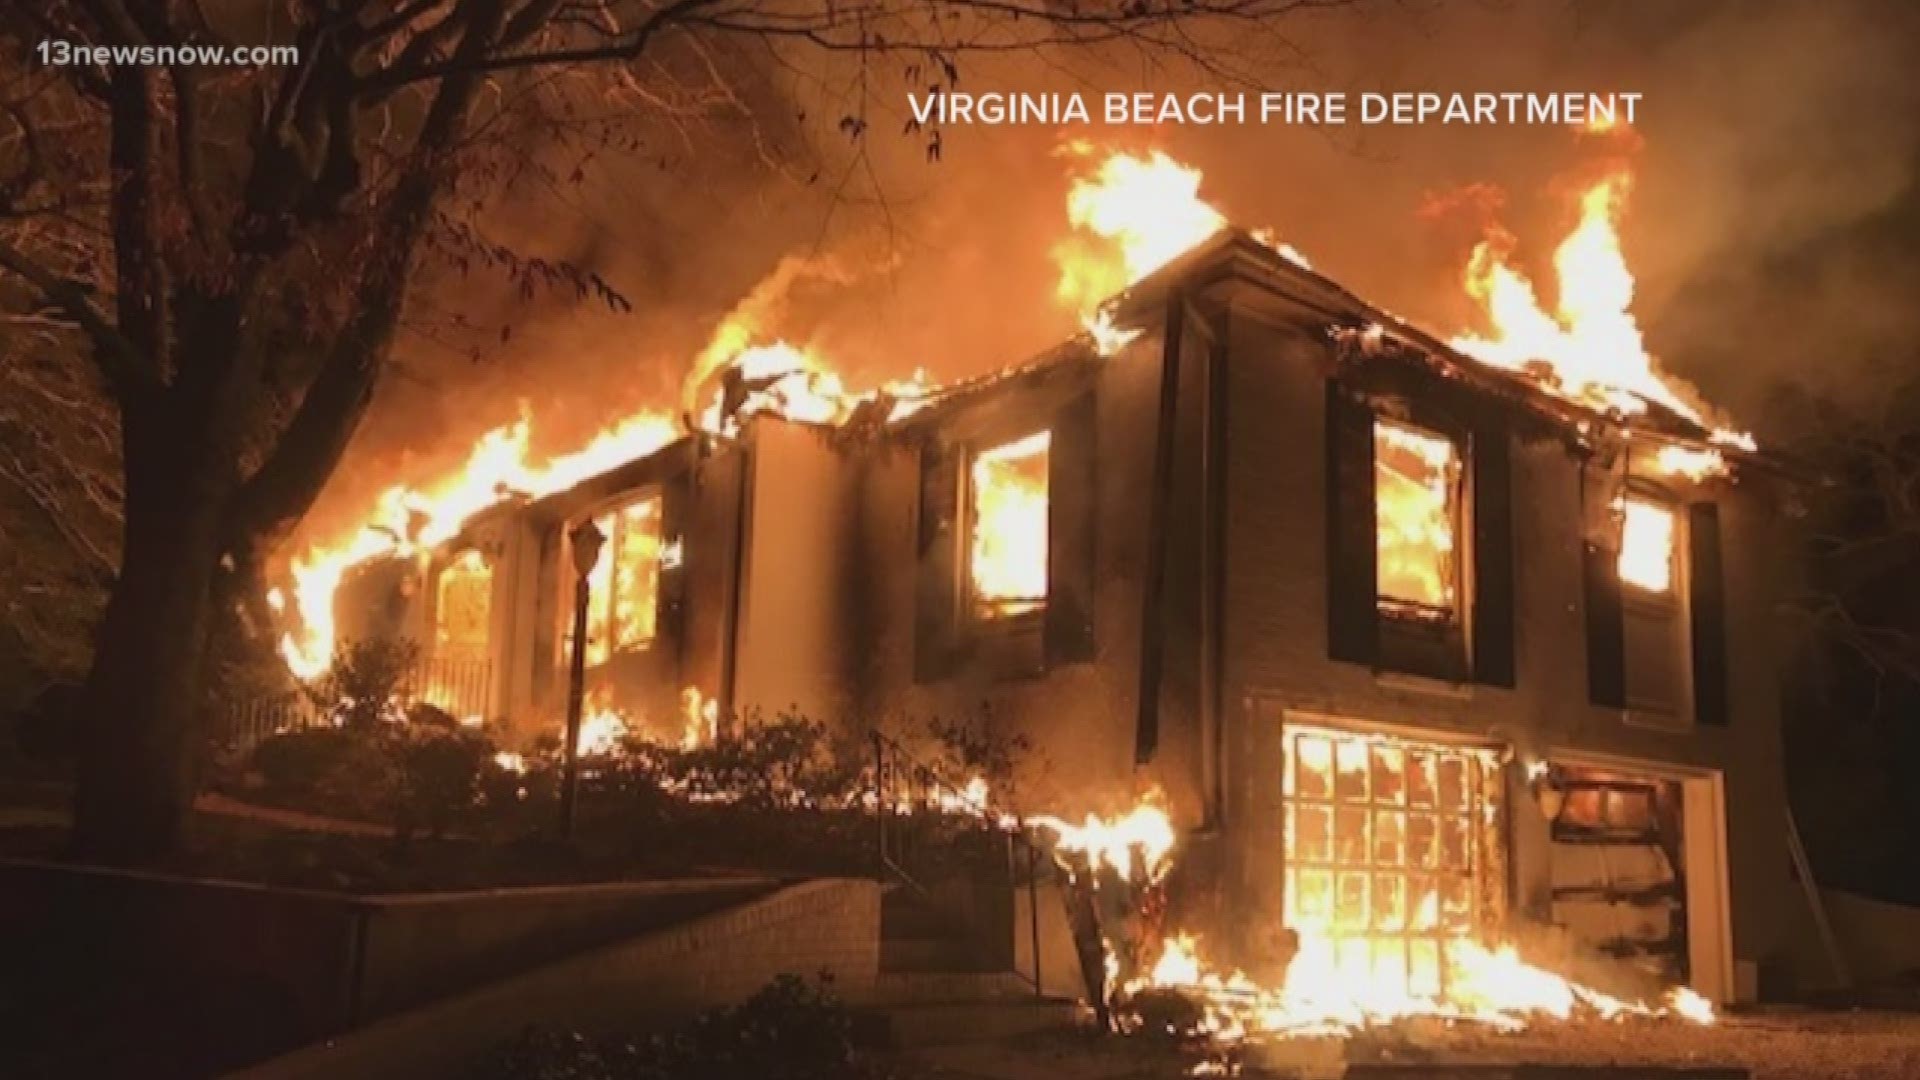 The massive fire destroyed a house in Virginia Beach.